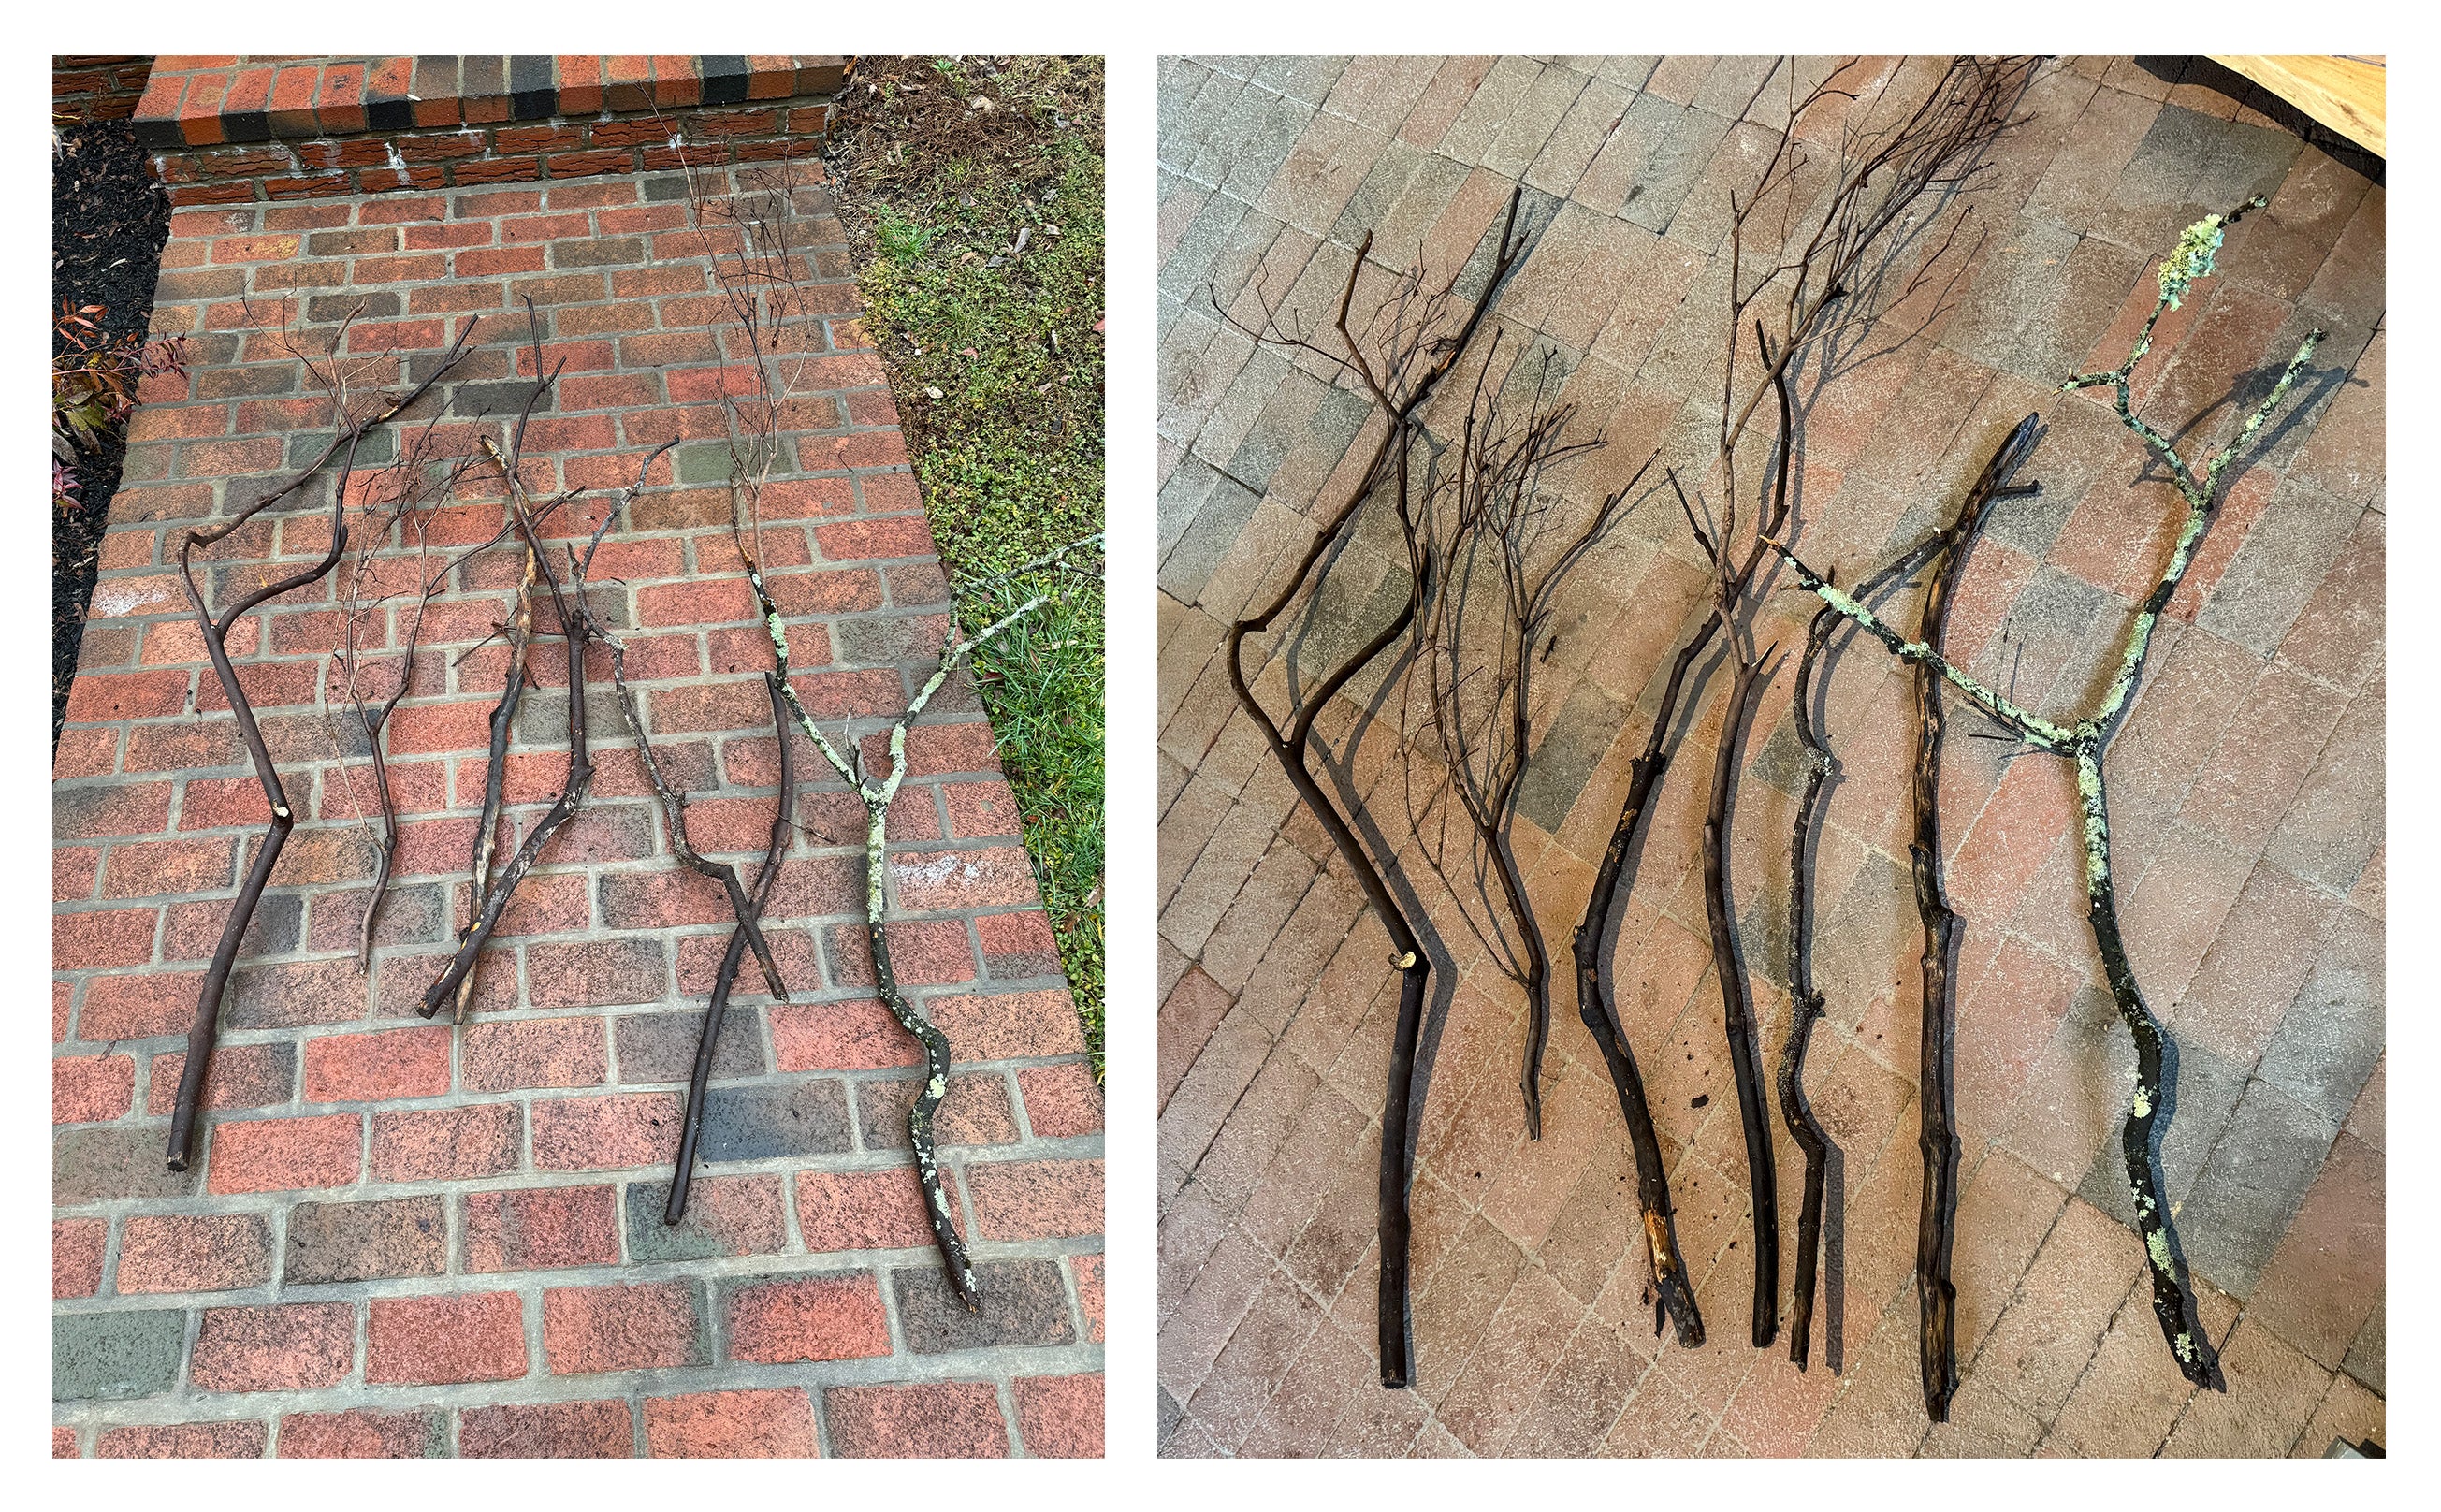 Image on left of branches laying on brick pathway outside, image on right of branches laying on brick floor inside